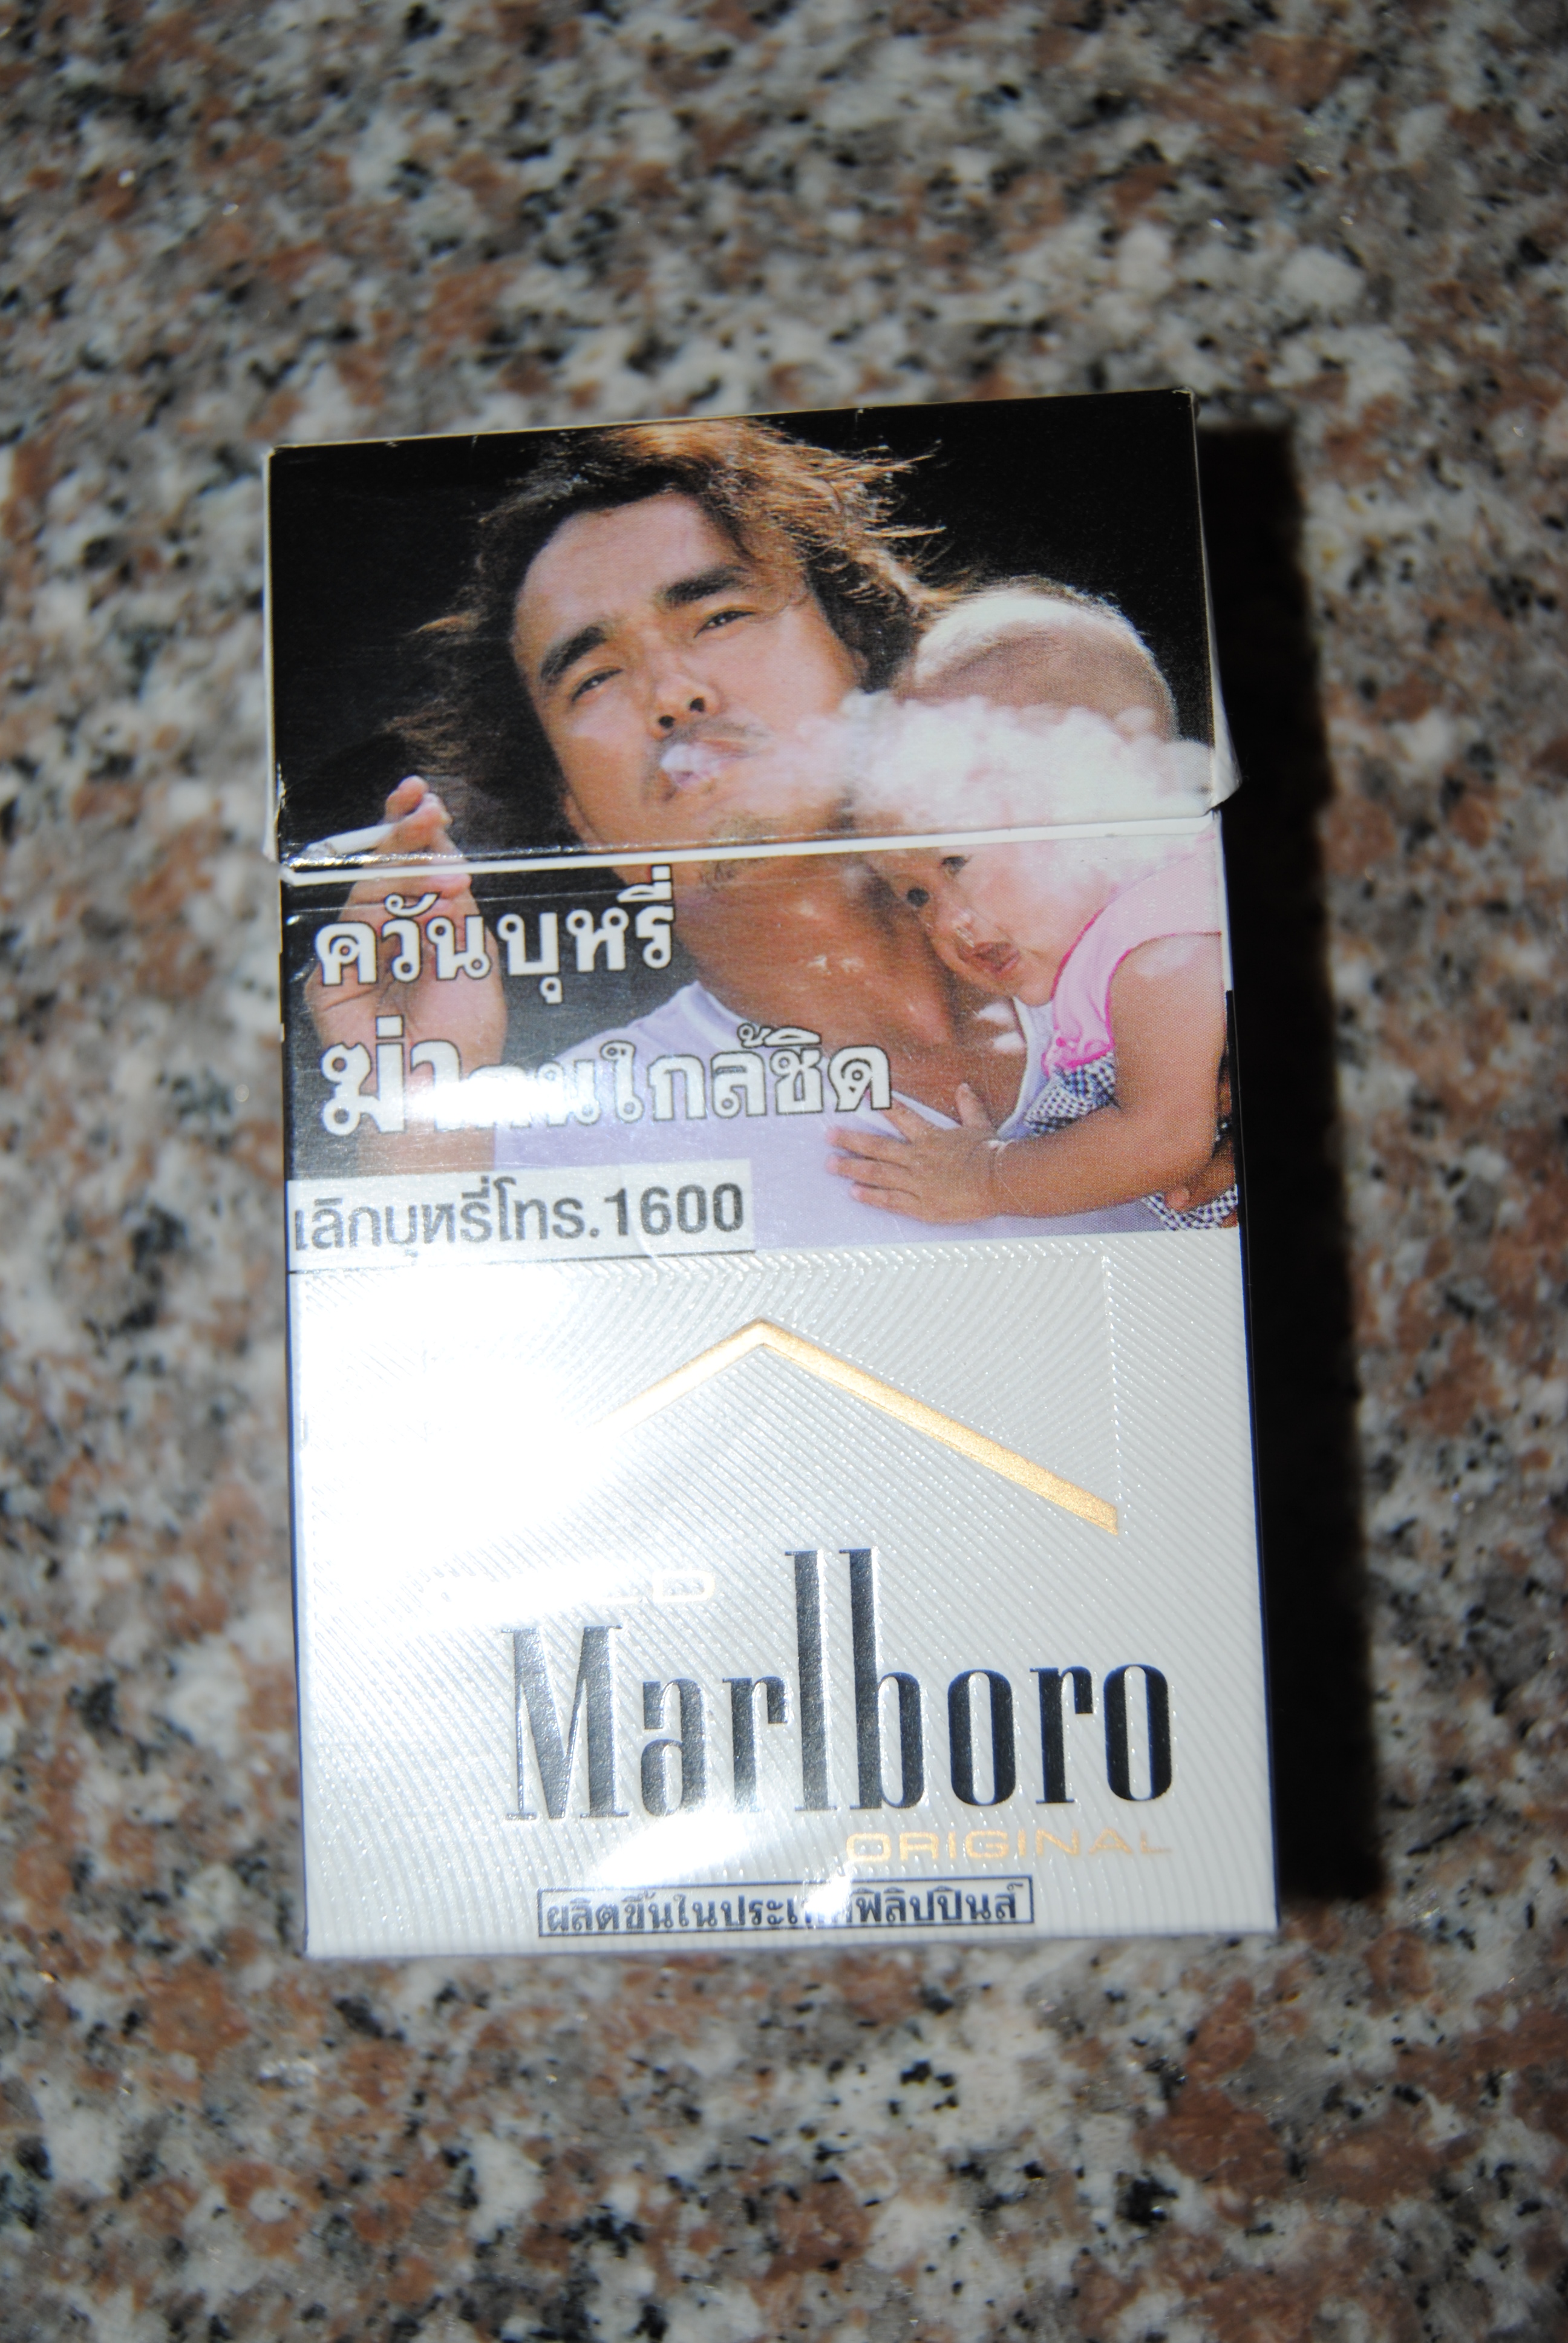 Thailand's anti-smoking campaign is much stronger than their anti-sex-worker campaign which I don't think exists. Though this image was much nicer than the packs with the rotten organs on them. 